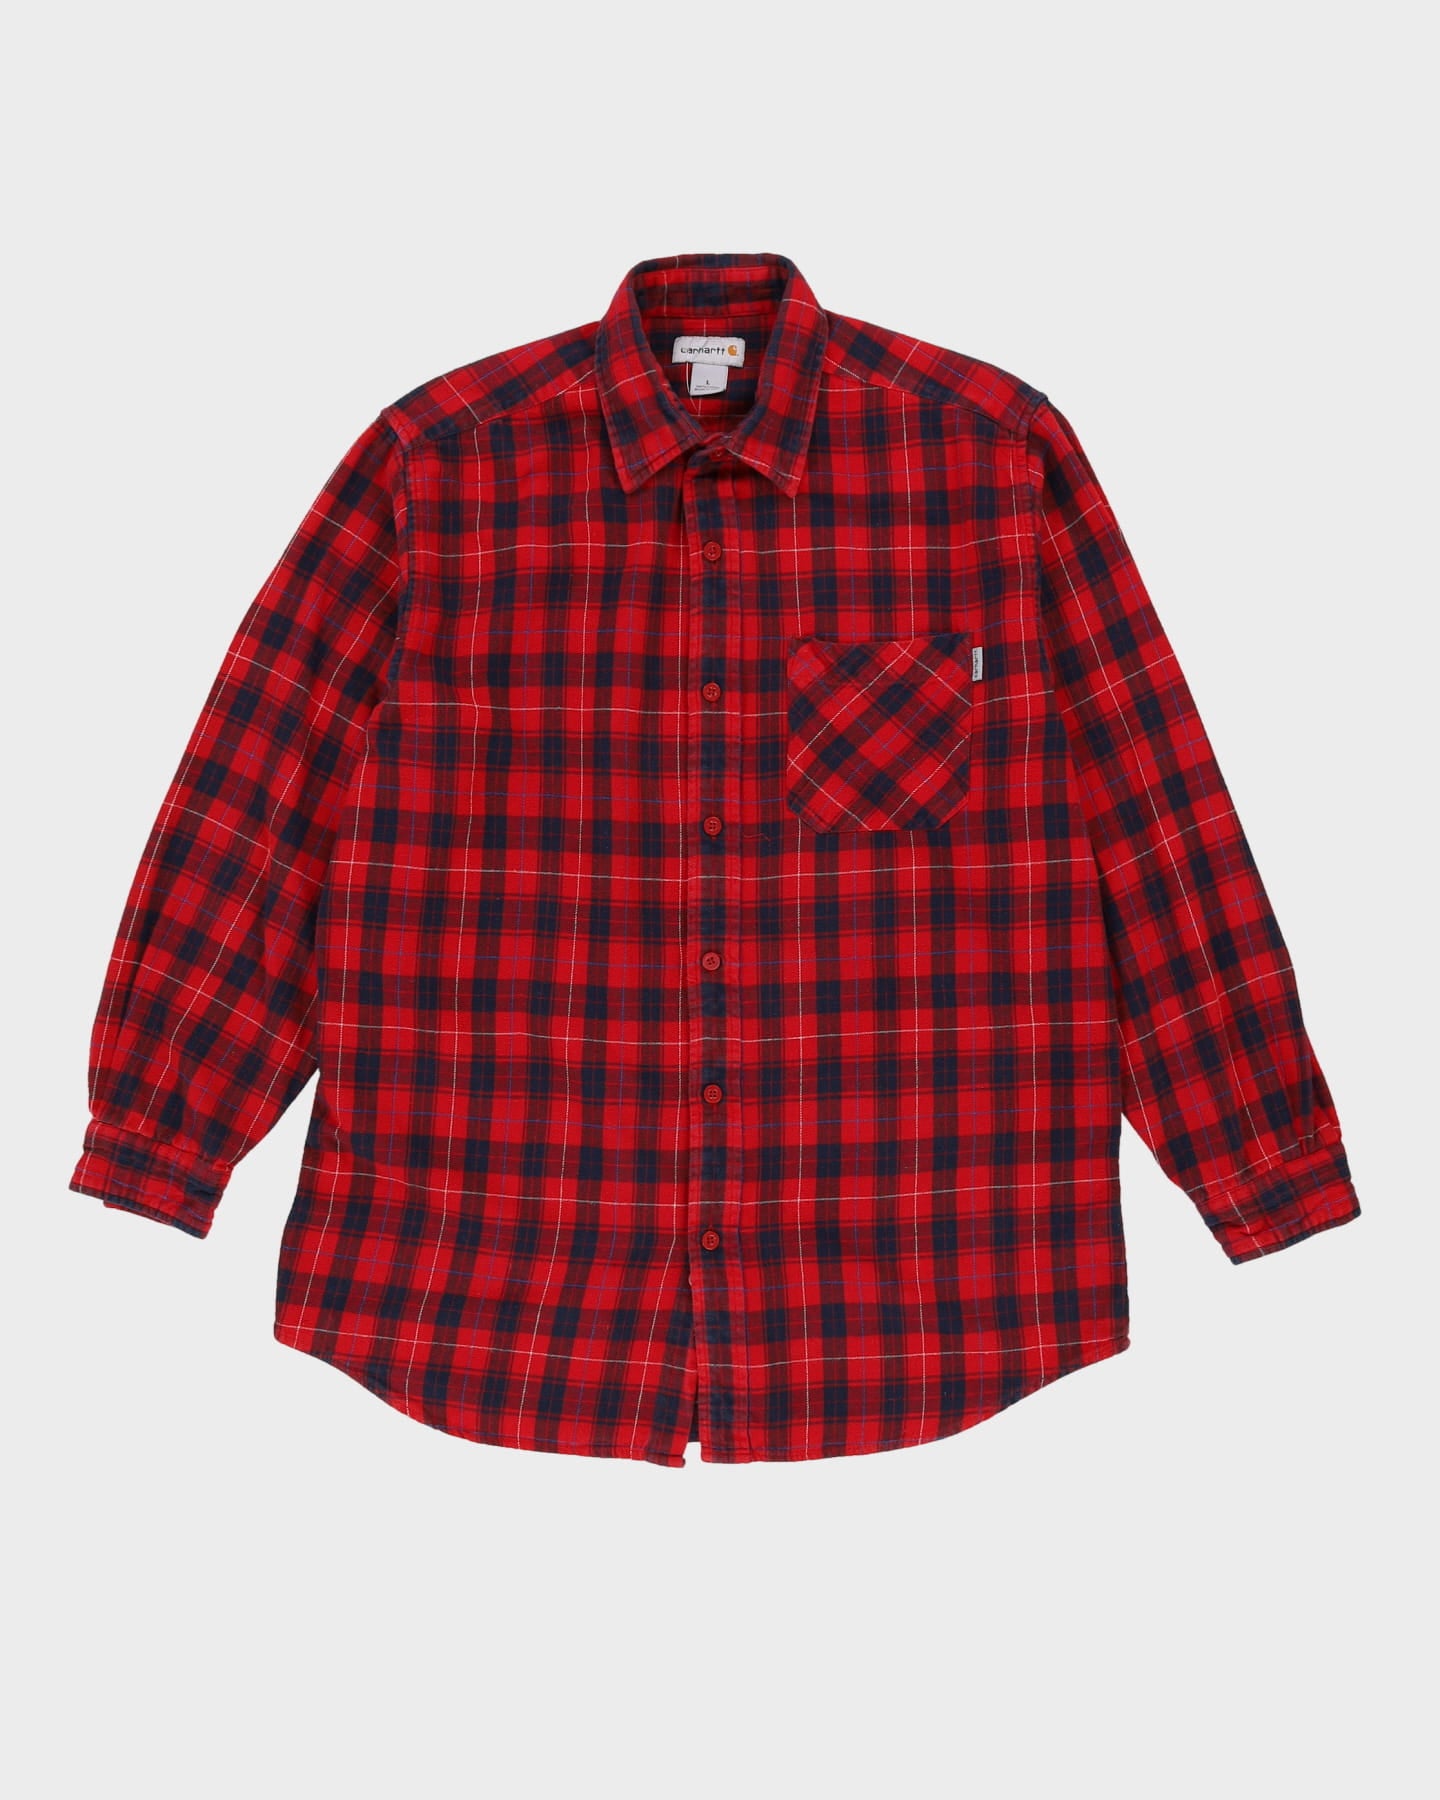 Carhartt Red Check Patterned Flannel Shirt - L